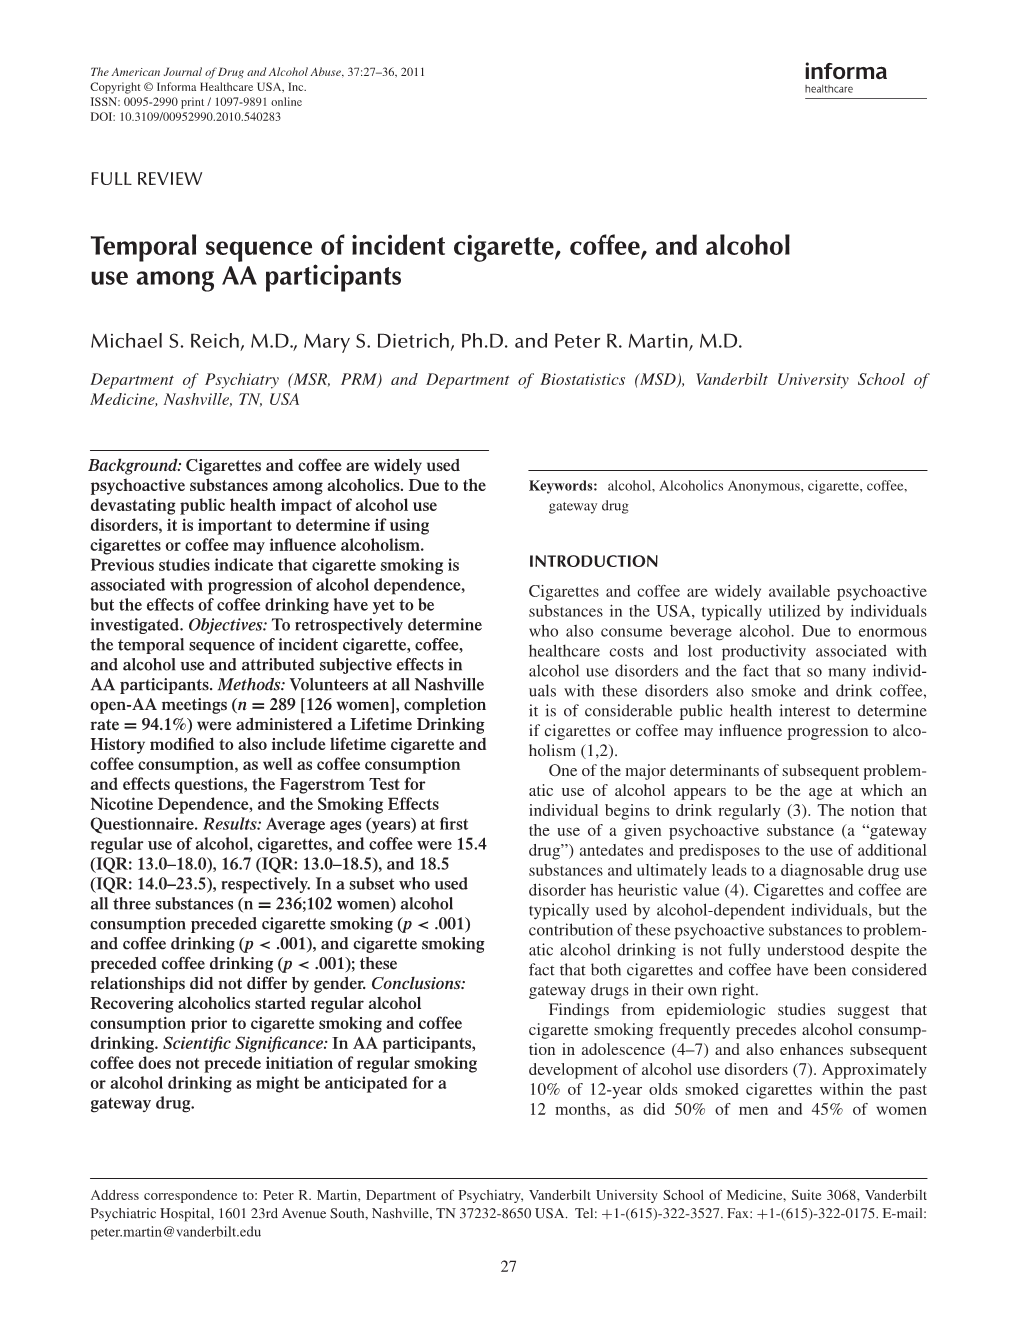 Temporal Sequence of Incident Cigarette, Coffee, and Alcohol Use Among AA Participants